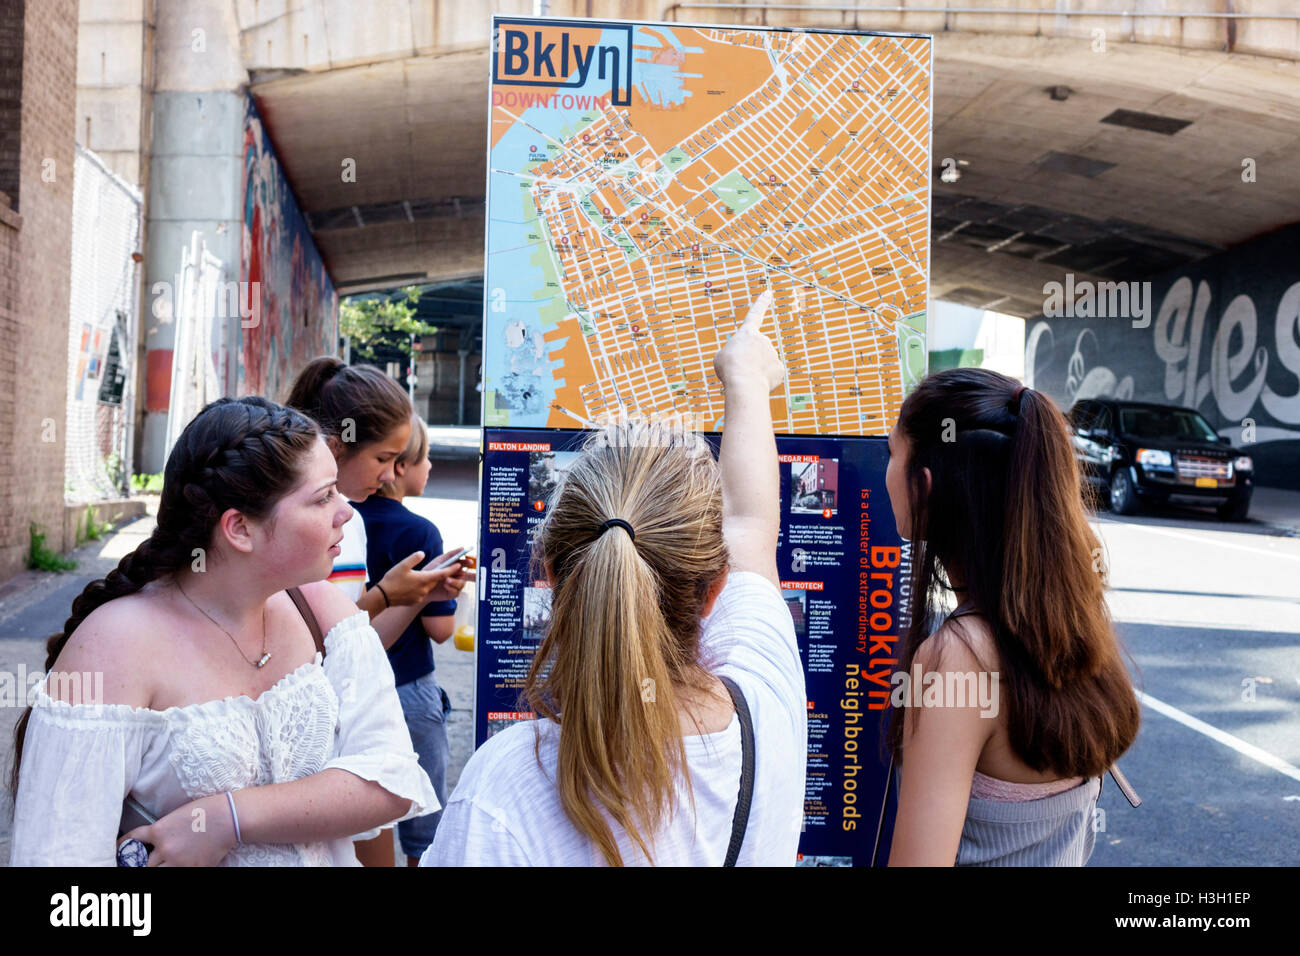 New York City,NY NYC Brooklyn,Downtown,Neighborhood,orientation sign,Street map,location,girl girls,youngster,female kids teen teens teenager Foto Stock